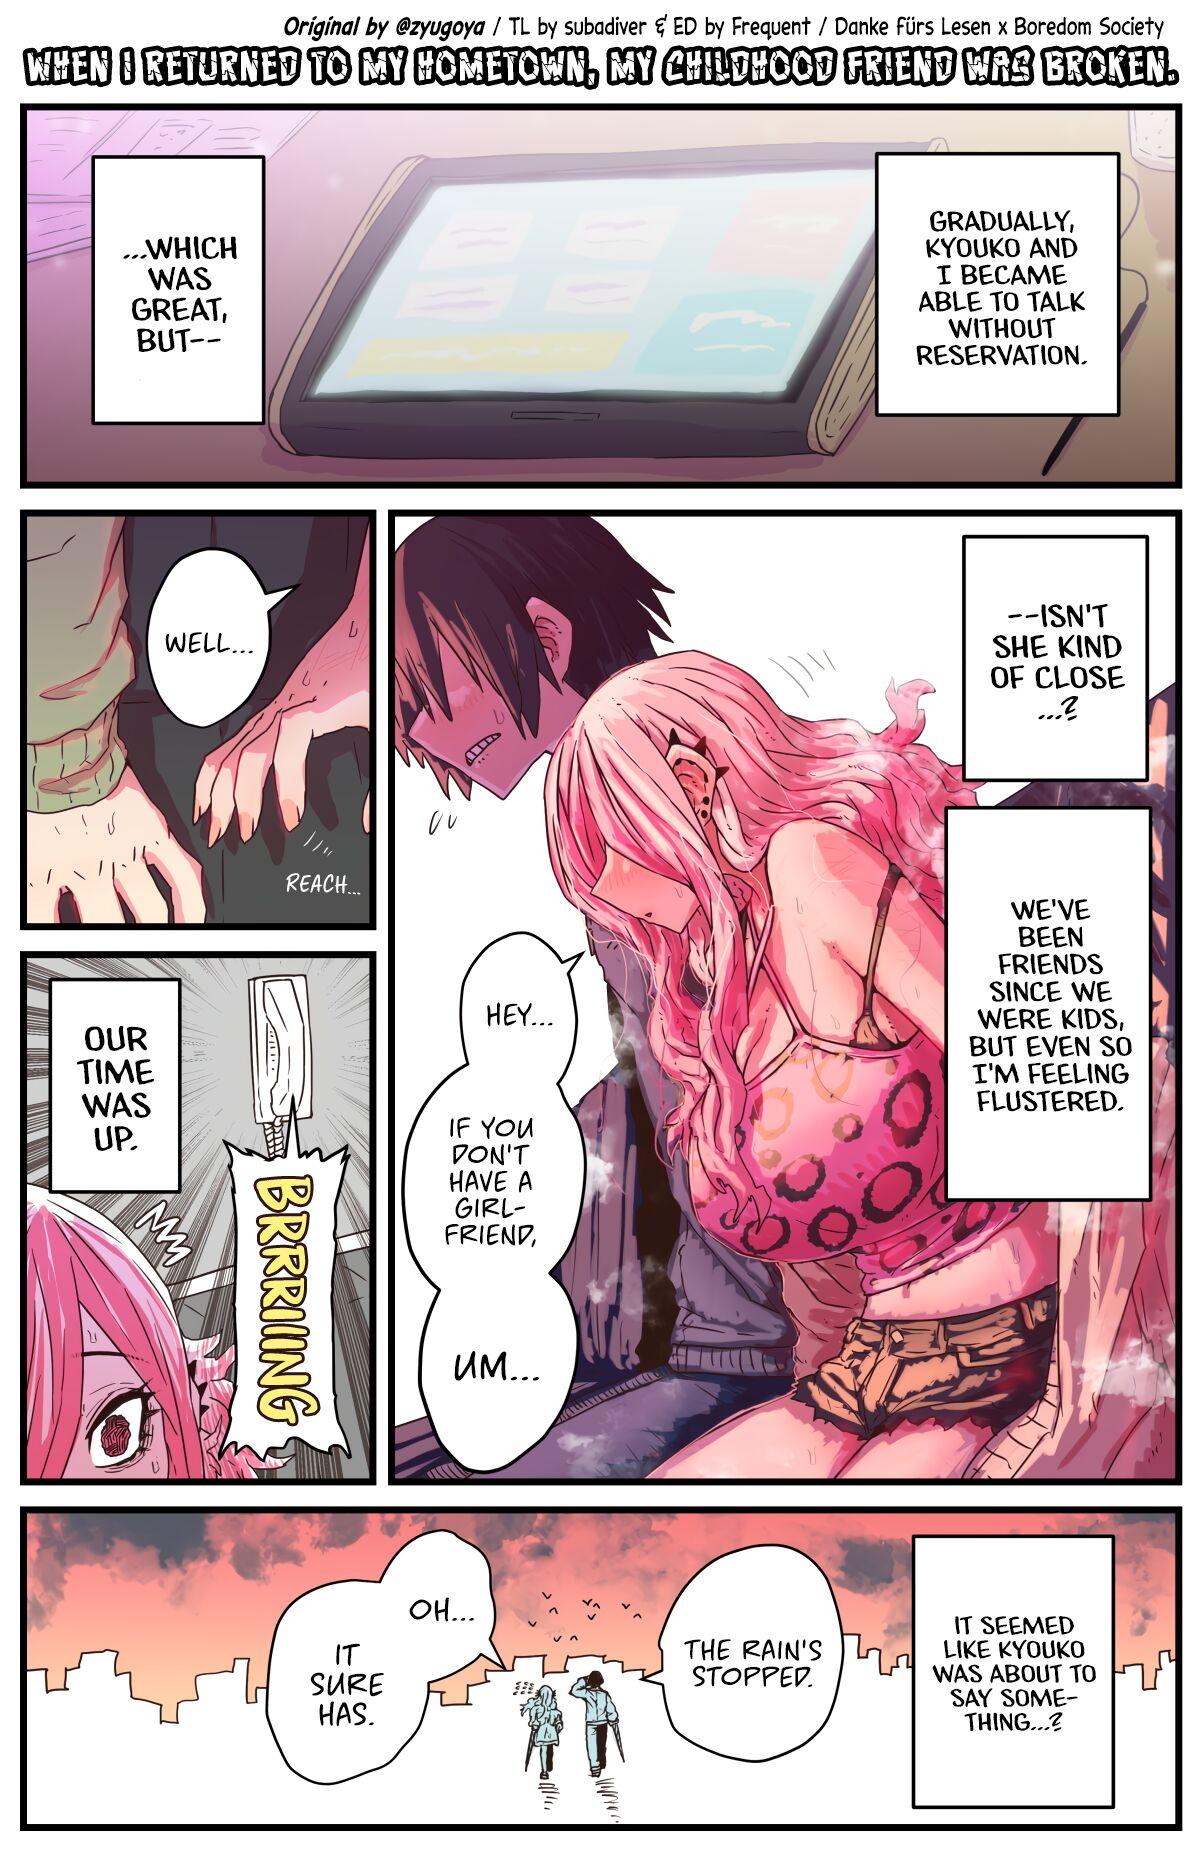 This When I Returned to My Hometown, My Childhood Friend was Broken - Original Big Booty - Page 10